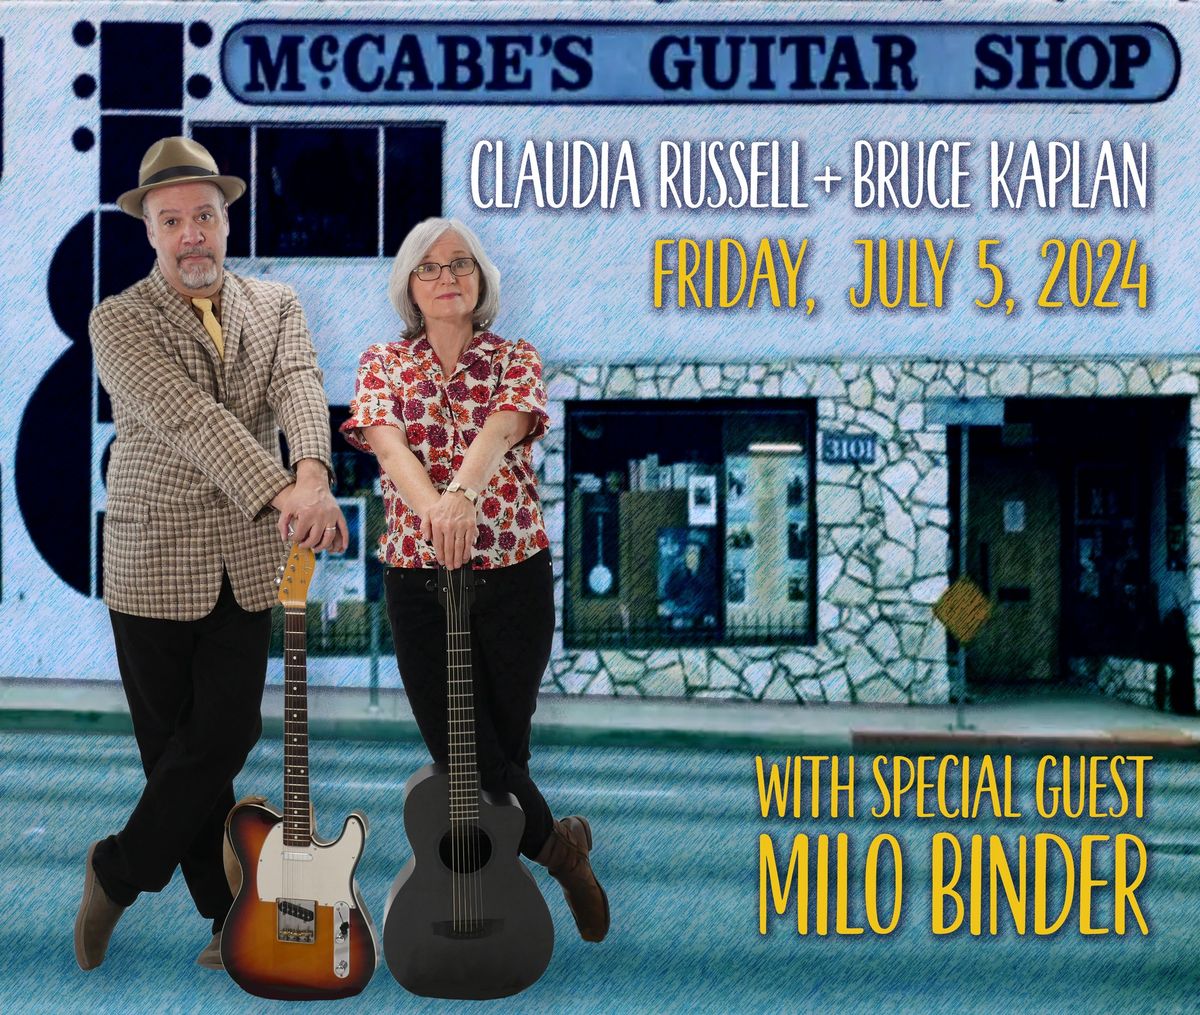 Claudia Russell + Bruce Kaplan @ McCabes & special guest Milo Binder